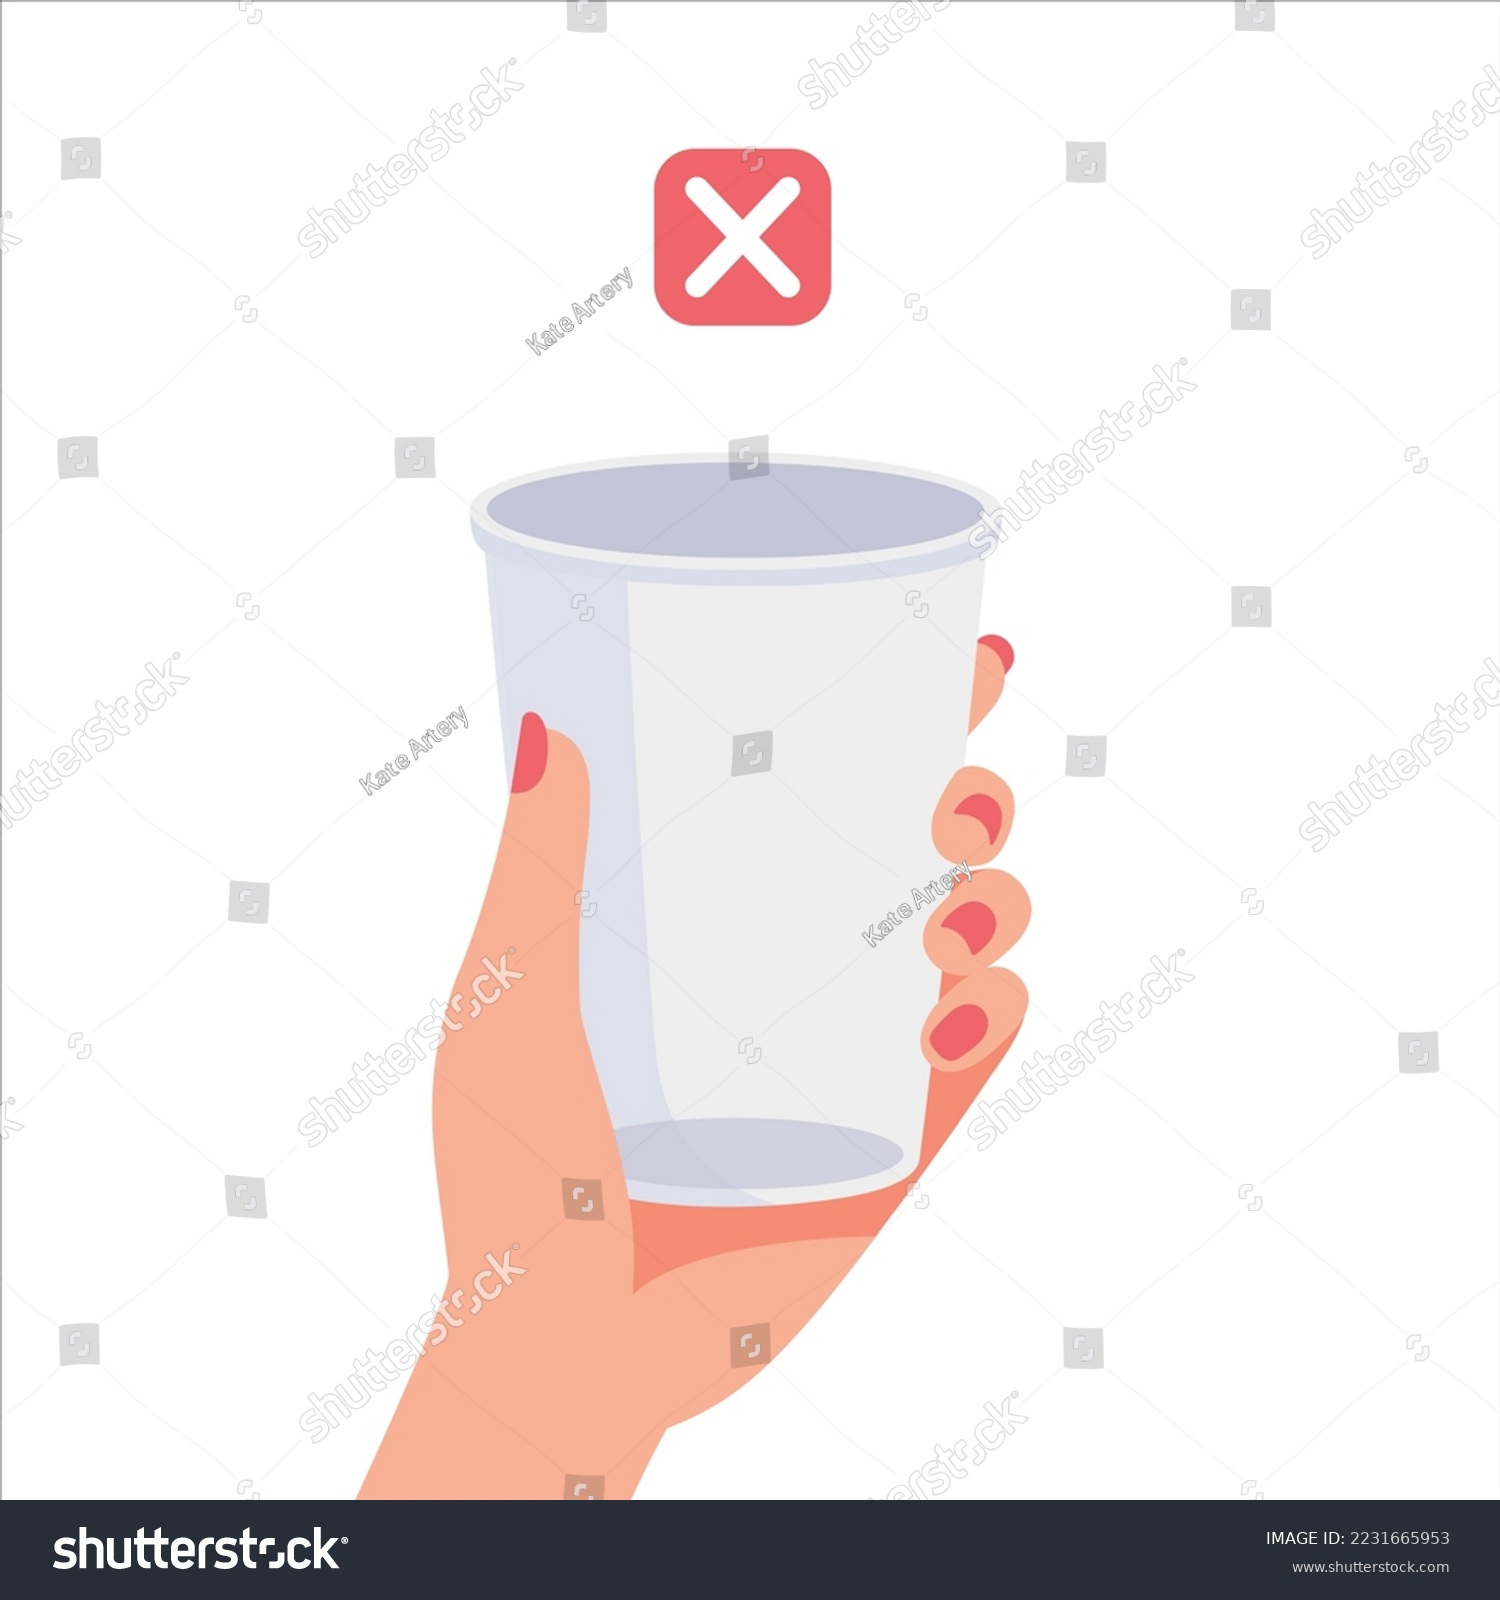 SVG of Woman's hand holding disposable plastic cup with prohibition sign. Reduce plastic, sustainable lifestyle, zero waste, ecological concept. Say no to plastic. Vector illustration in cartoon style svg